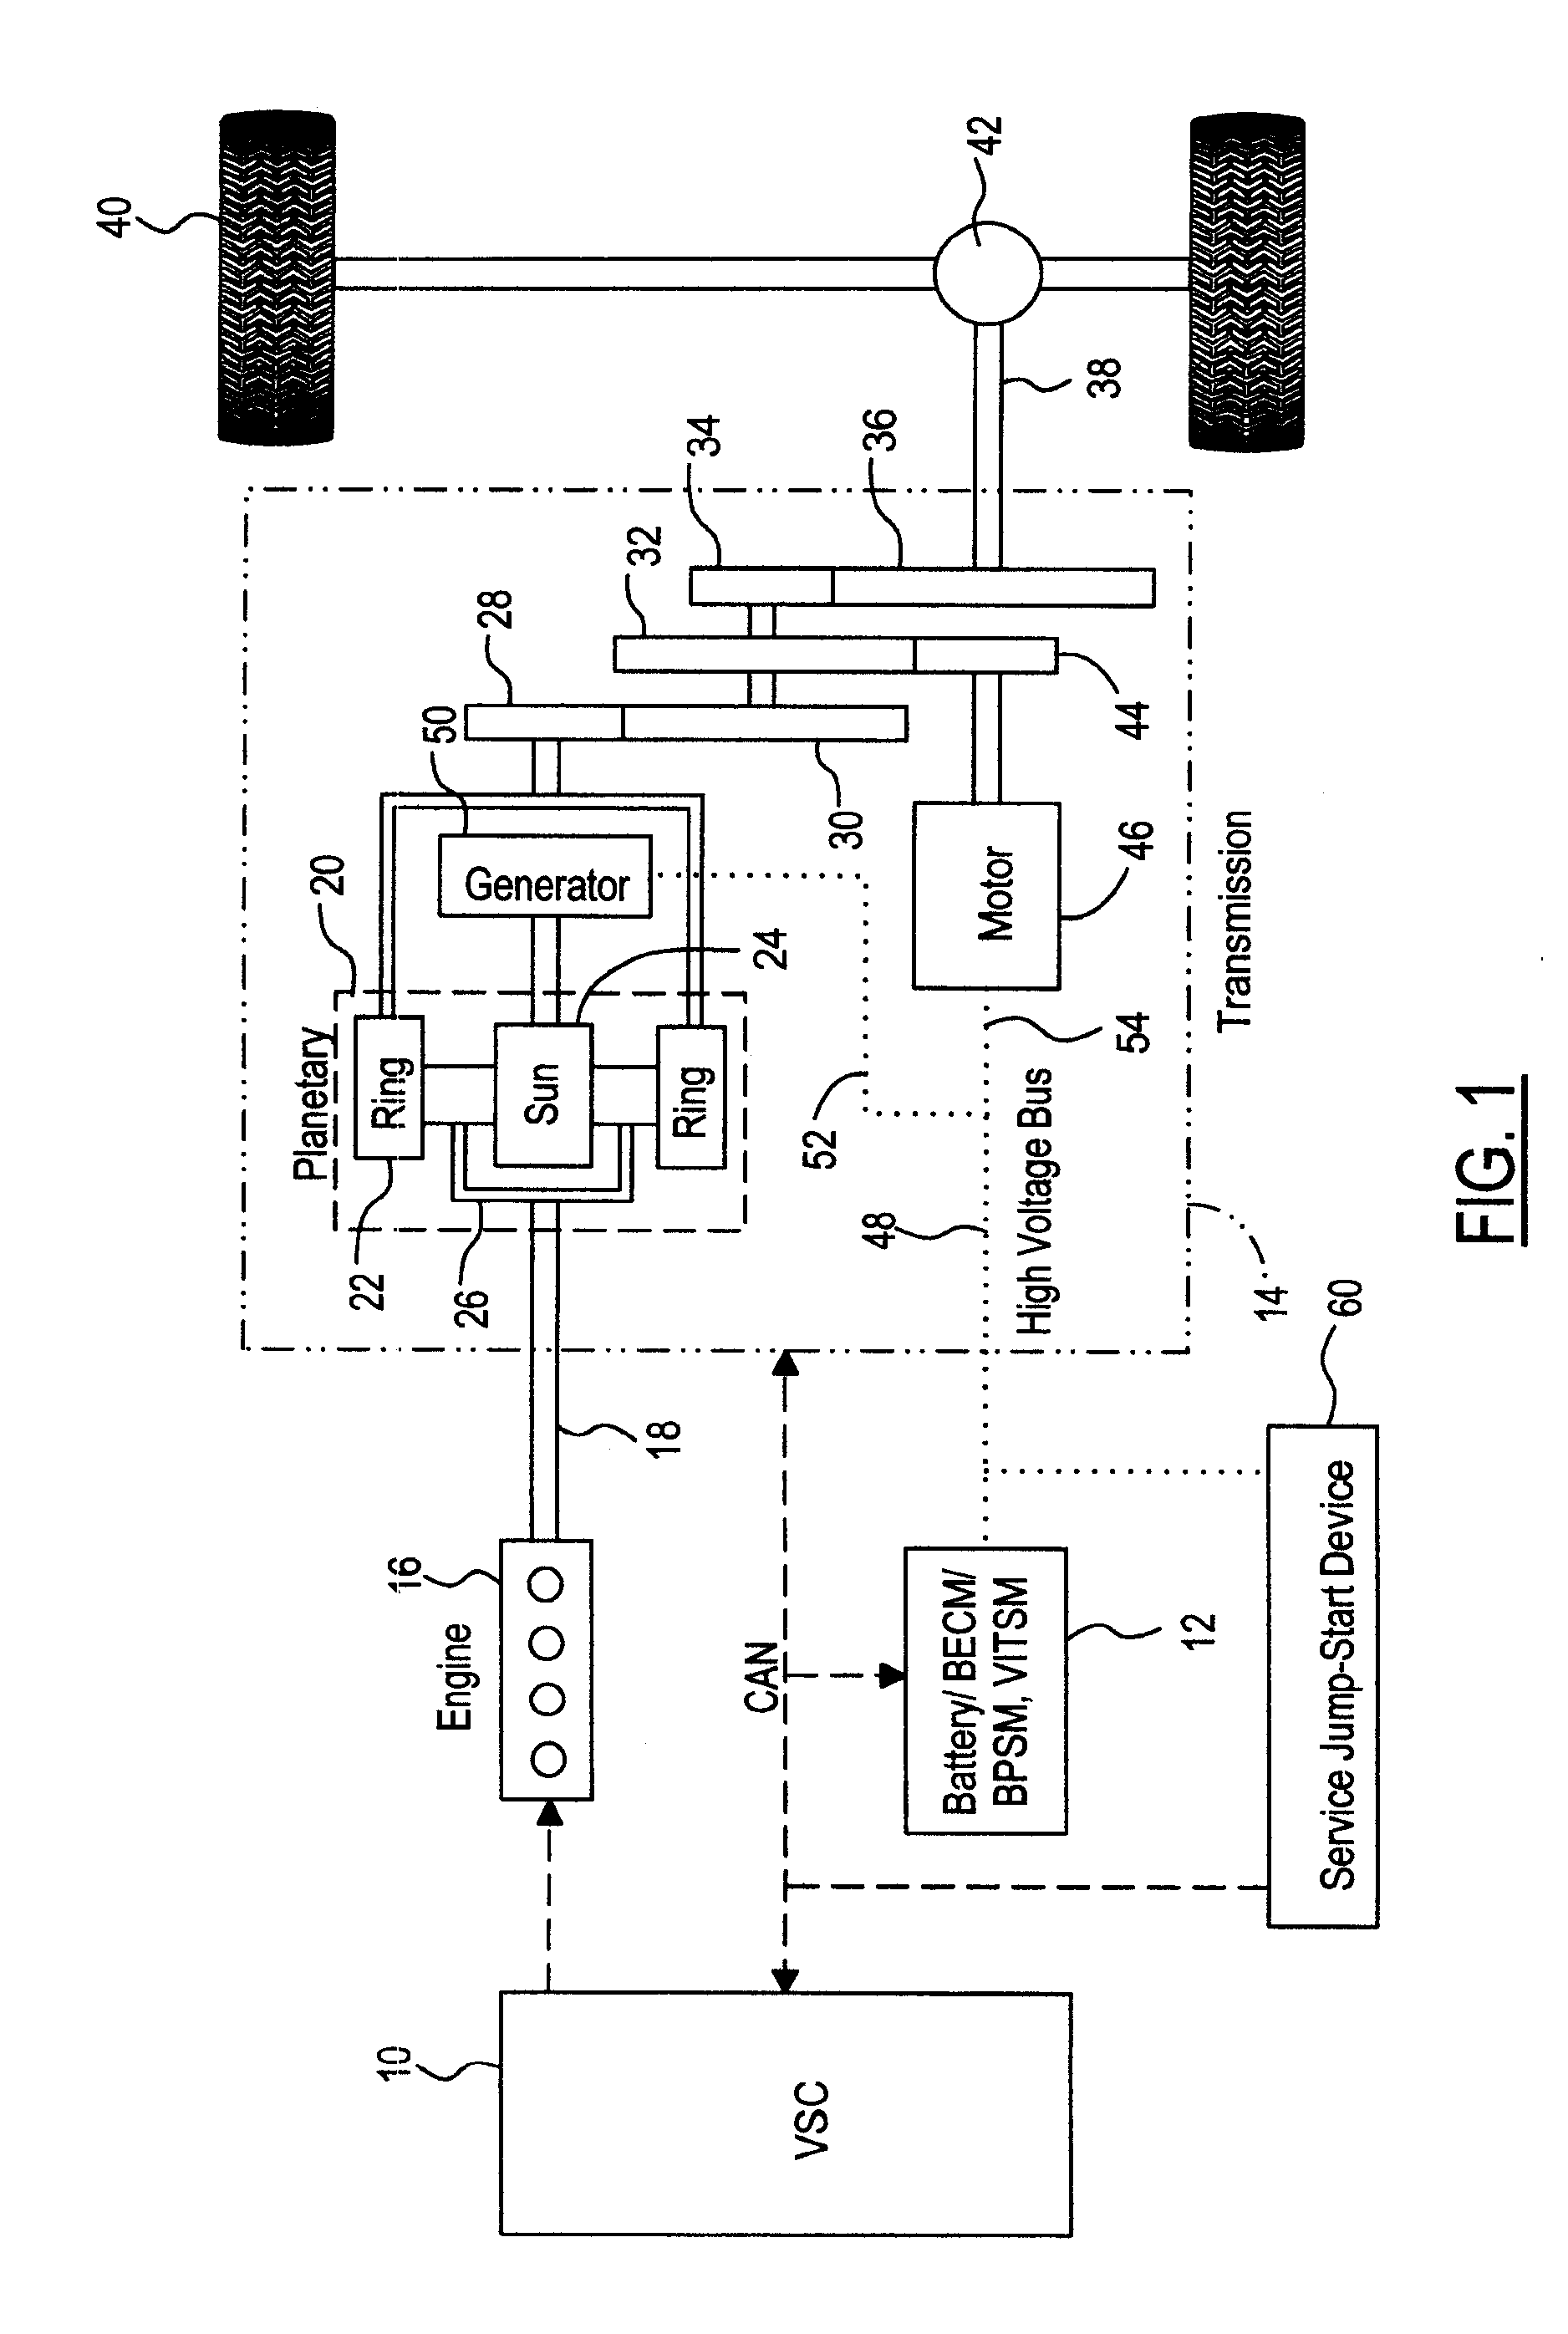 Service jump-start device for hybrid electric vehicles